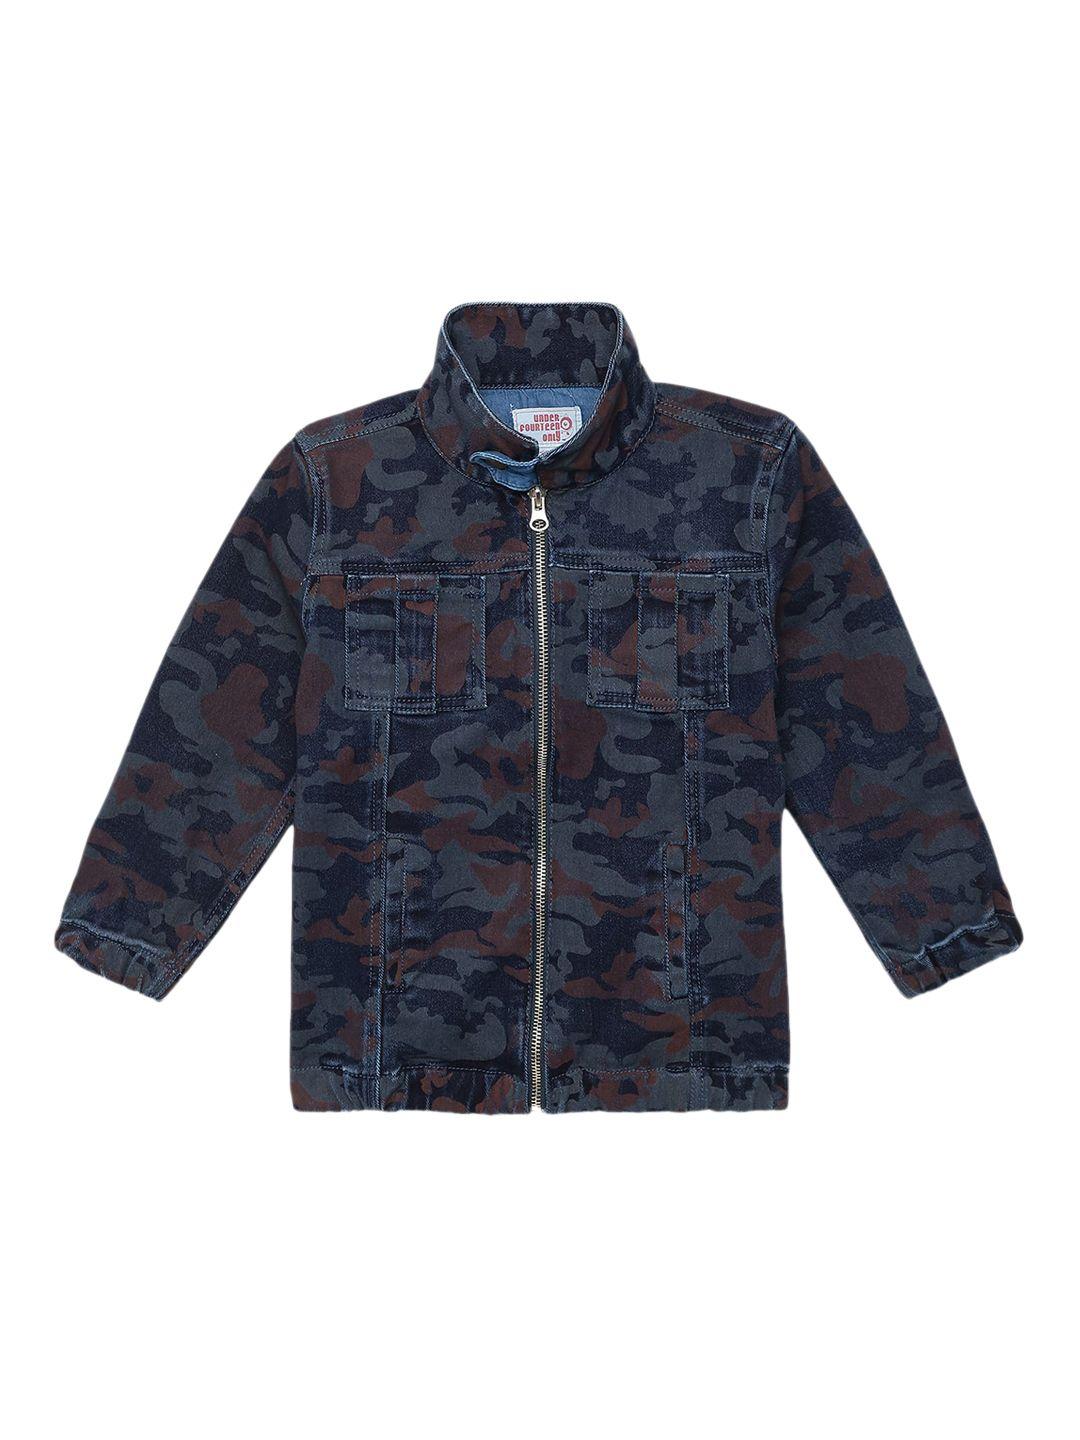 under fourteen only boys navy blue camouflage cotton tailored jacket